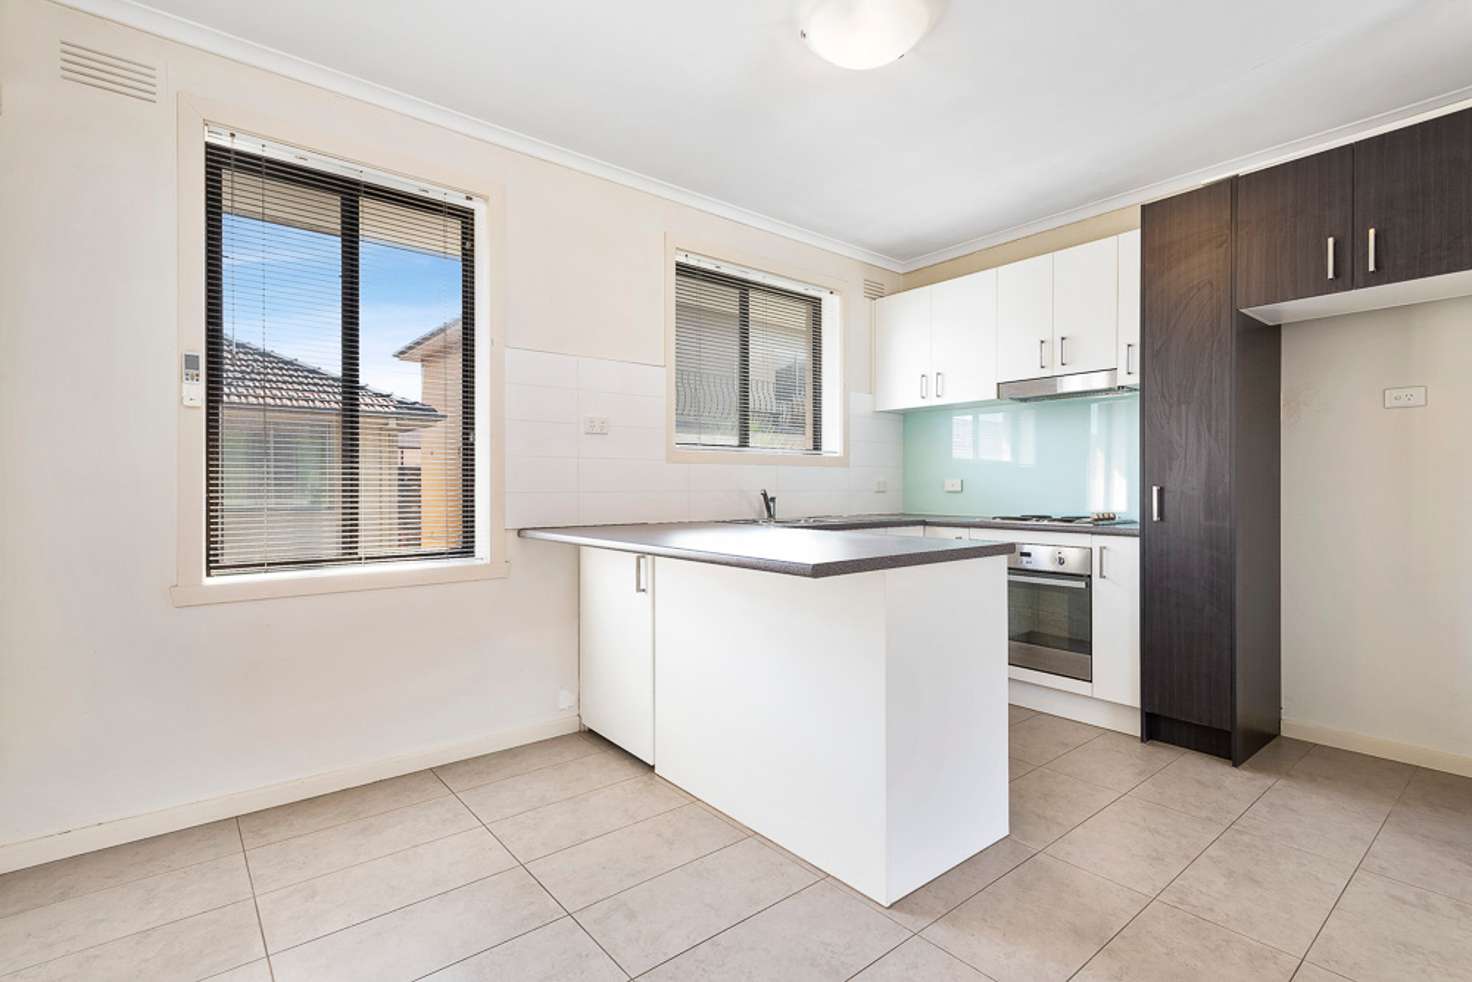 Main view of Homely apartment listing, 11/707 Barkly Street, West Footscray VIC 3012